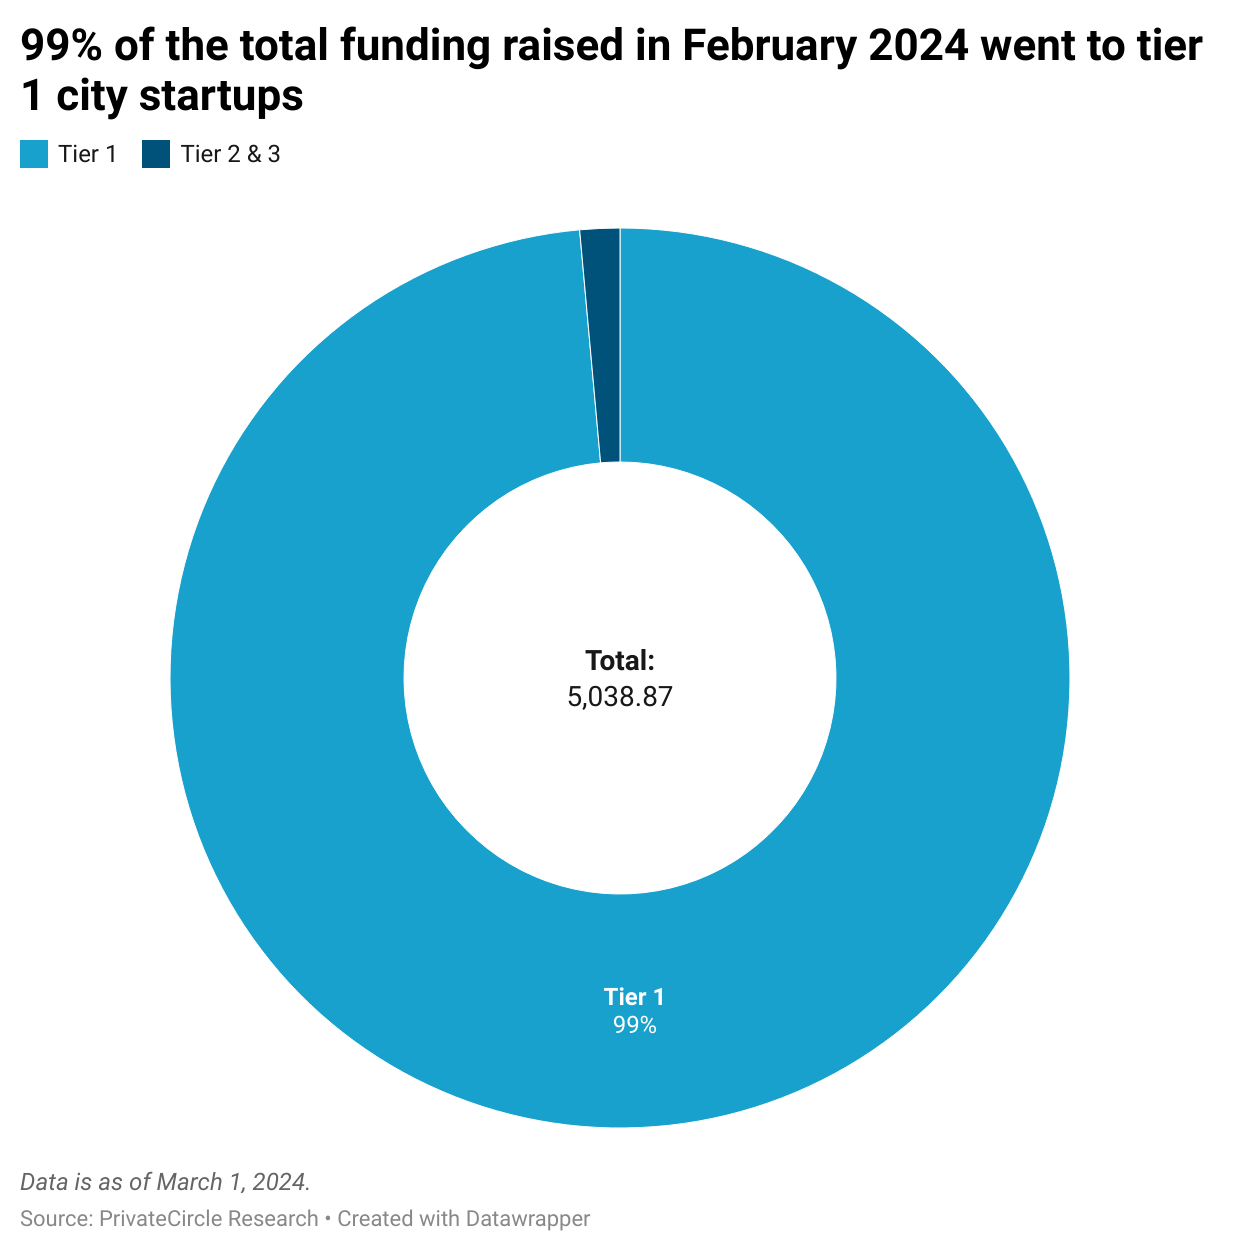 99% of the total funding raised in February 2024 went to tier 1 city startups

Tier 1 city startups raised ₹4967 cr as compared to ₹72 cr raised by tier 2 & 3 city startups. Also, a total of 130 funding deals were recorded in February, out of which 108 happened in Tier 1 cities.